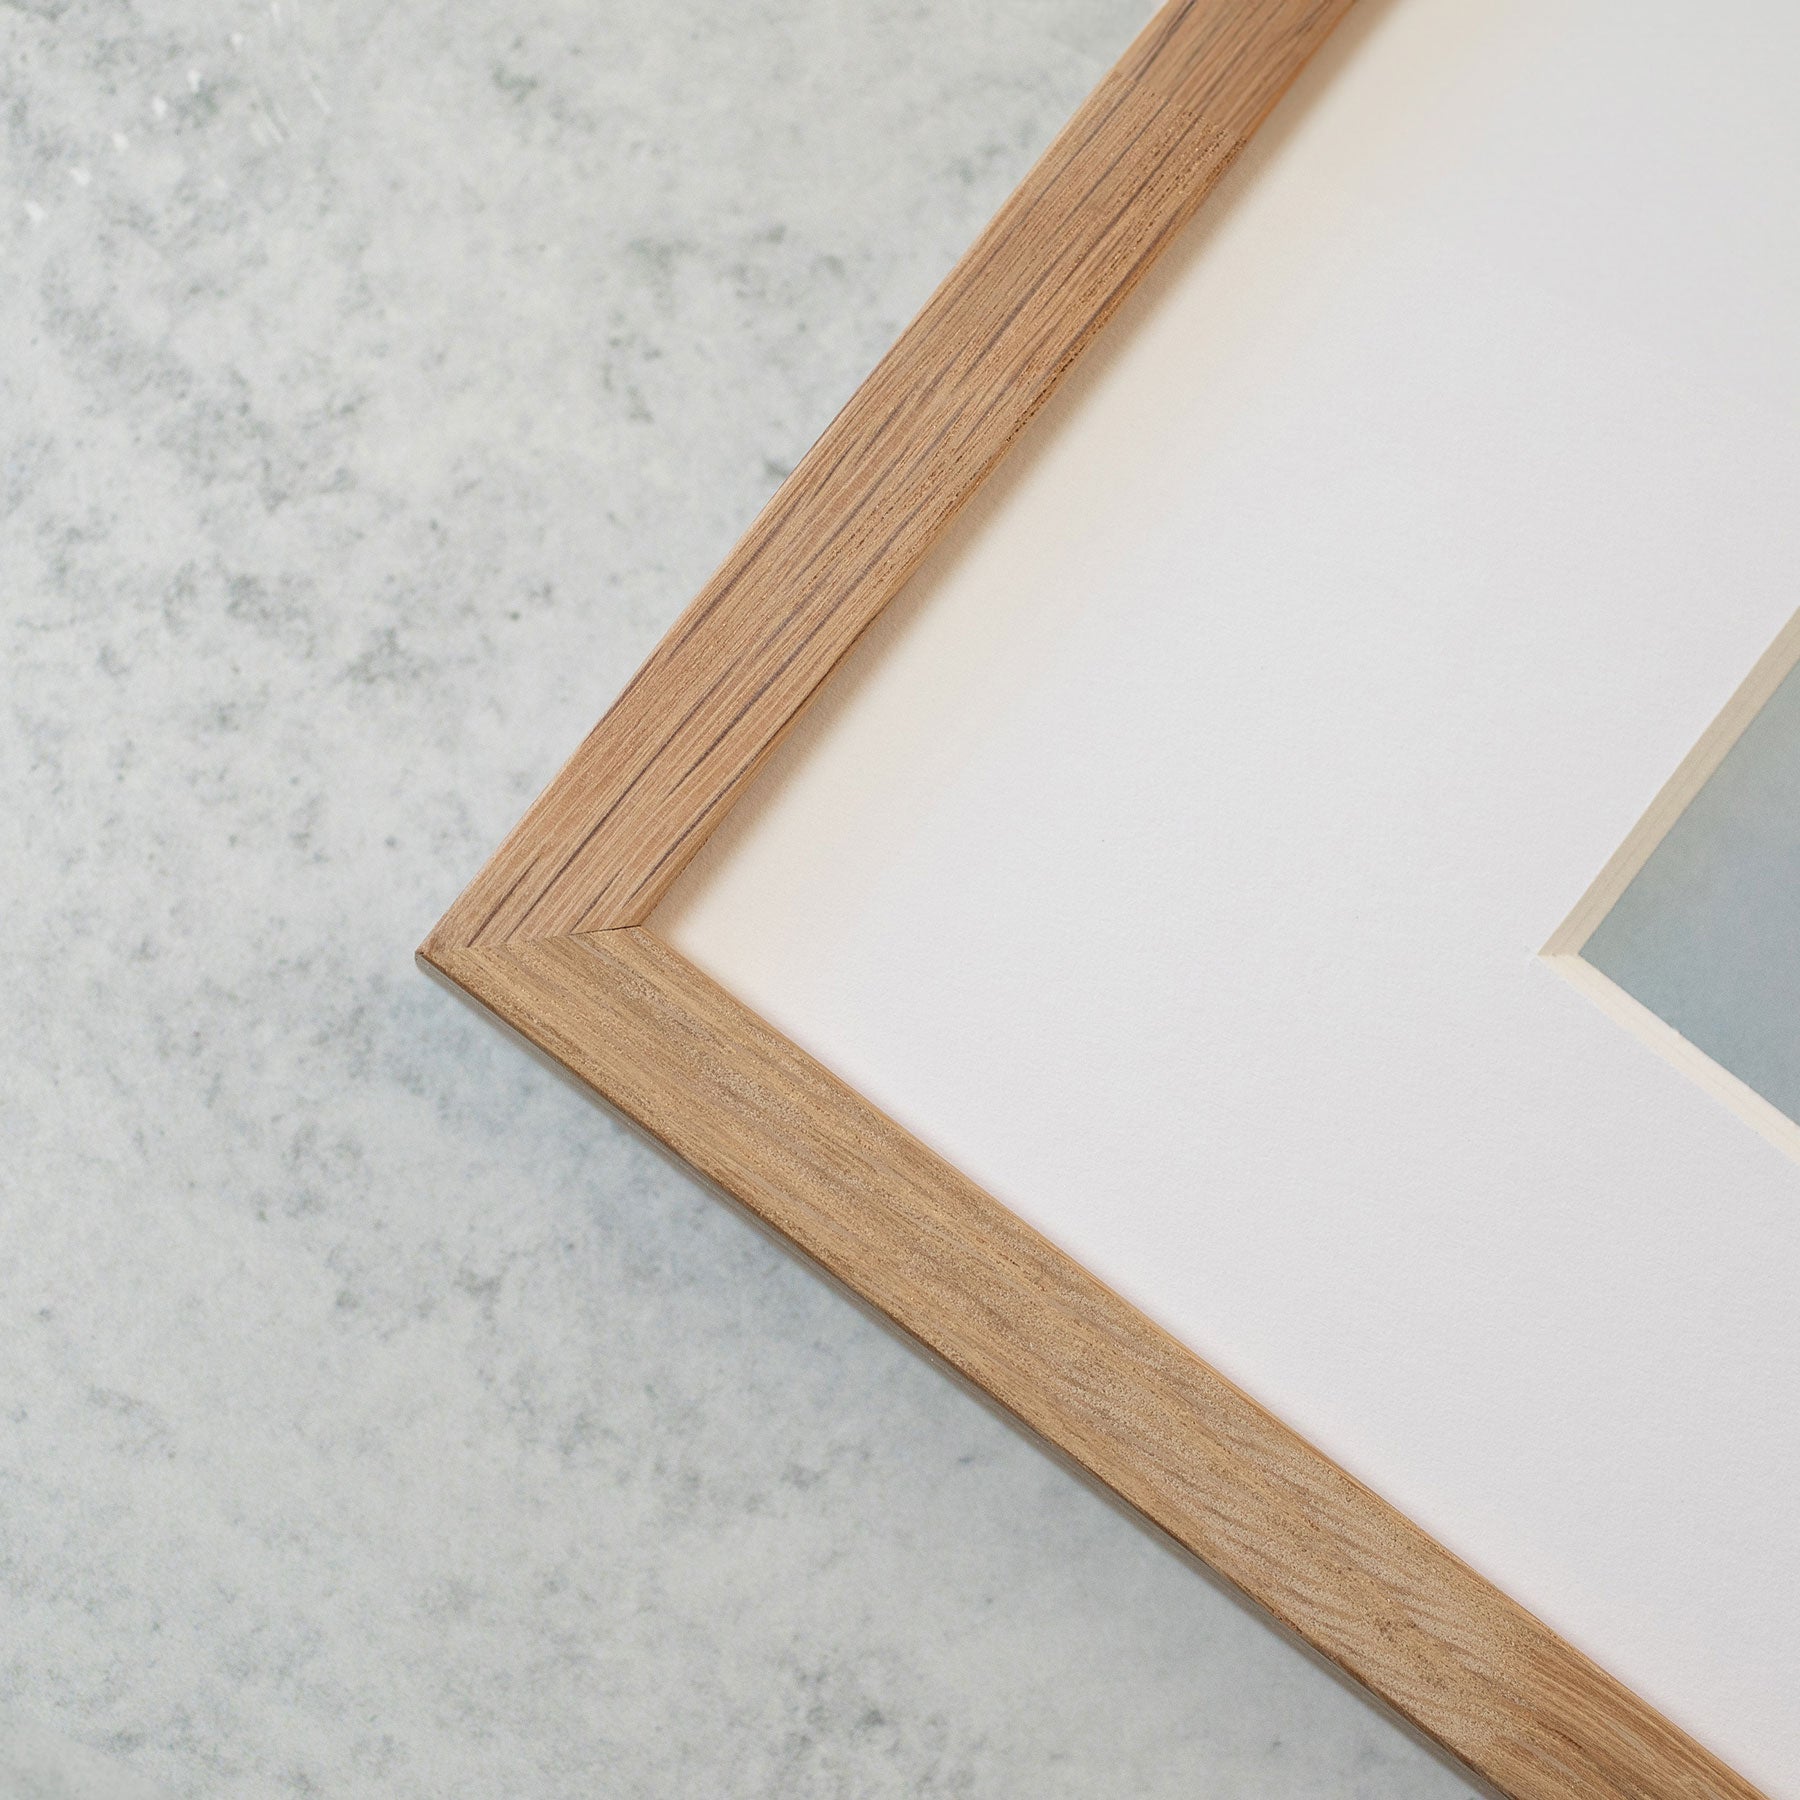 Close-up of a wooden picture frame corner on a white background, showcasing the grain and texture of the wood against a marble surface, featuring Offley Green&#39;s Big Sur Coastal Print, &#39;Julia Pffeifer&#39; wall art on archival photographic paper.